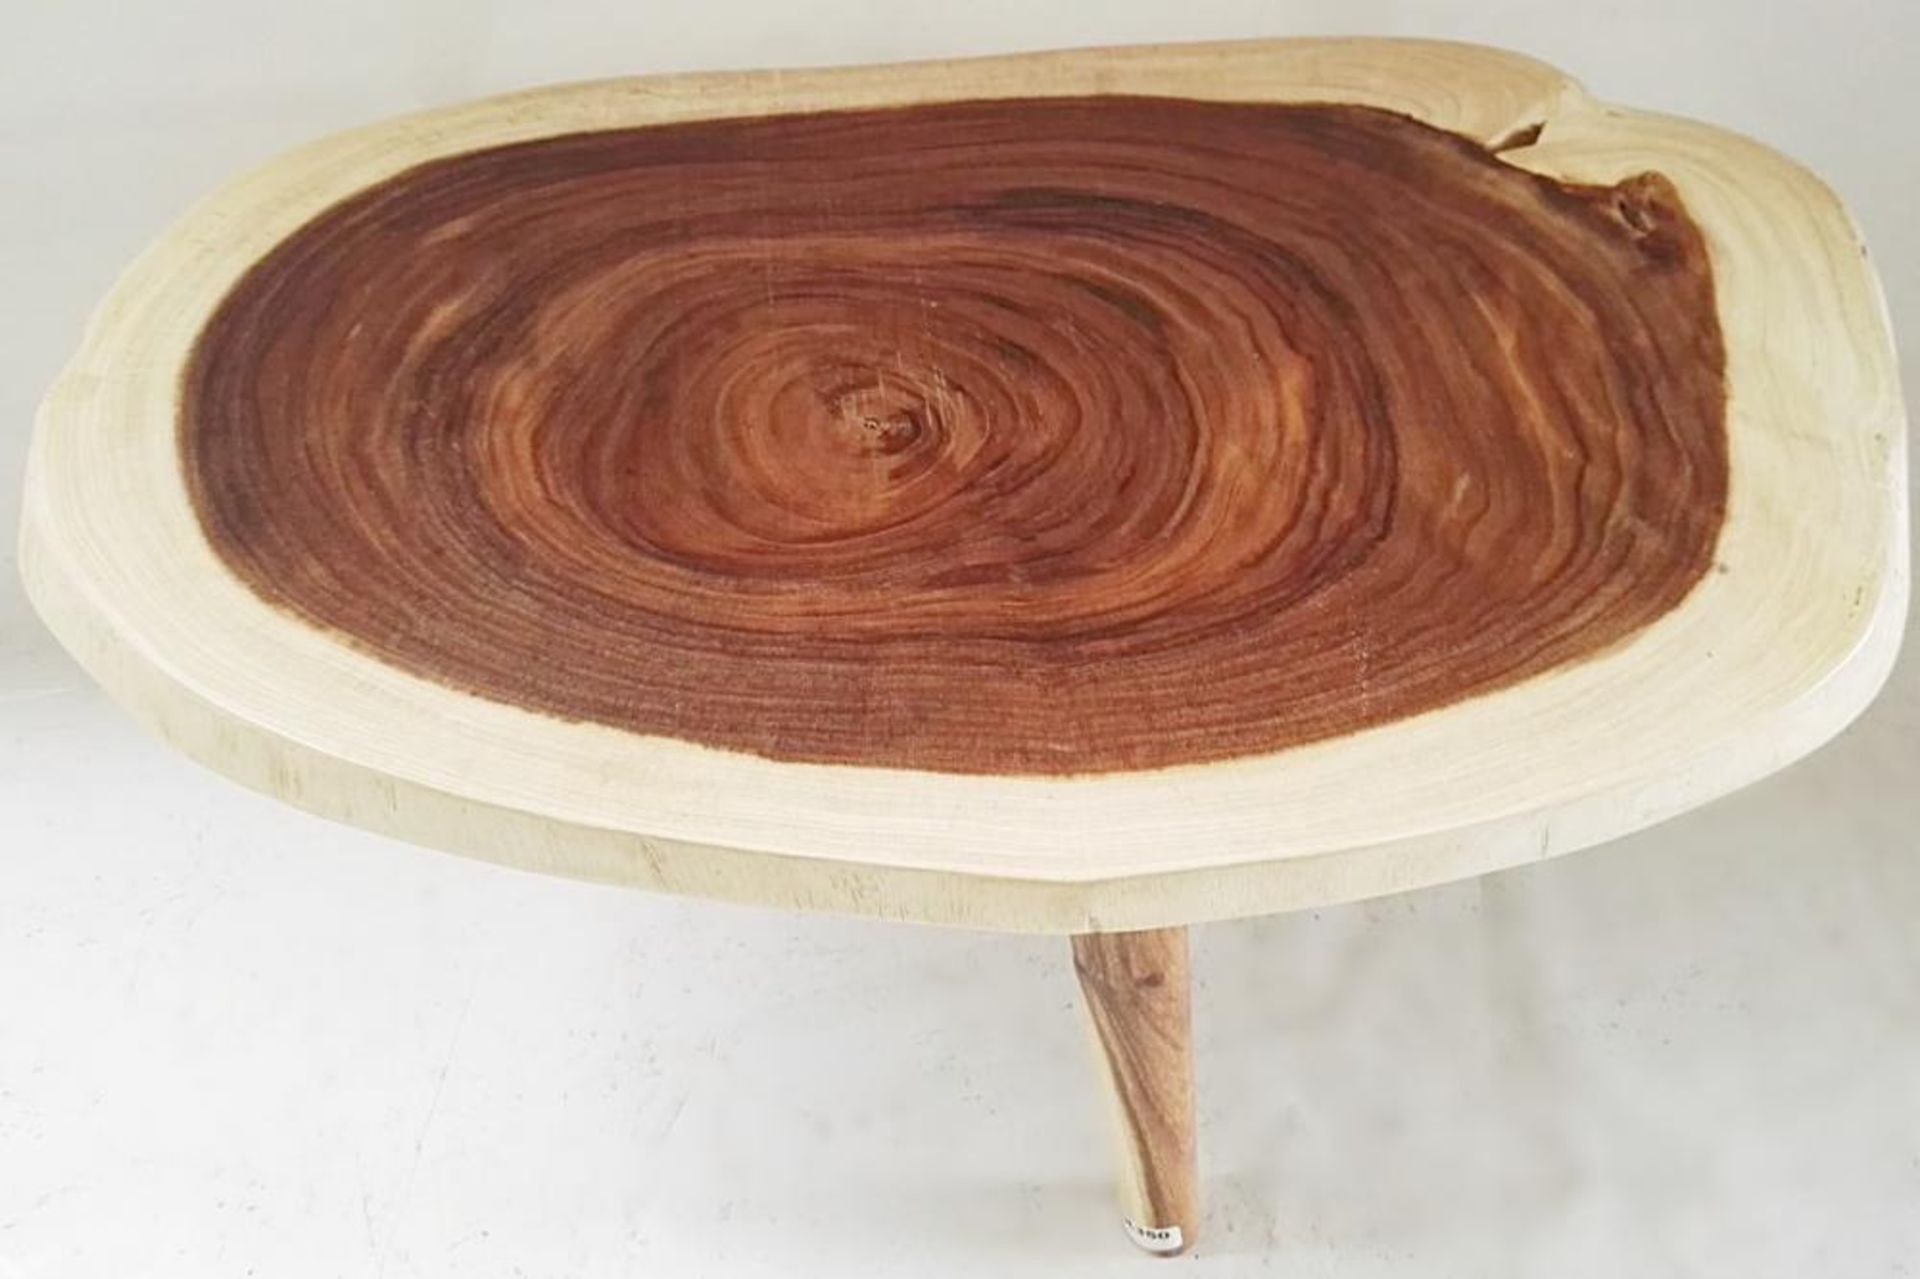 1 x Unique Three Legged Reclaimed Solid Tree Trunk Coffee Table - Dimensions (approx): W90 x D56cm, - Image 3 of 5